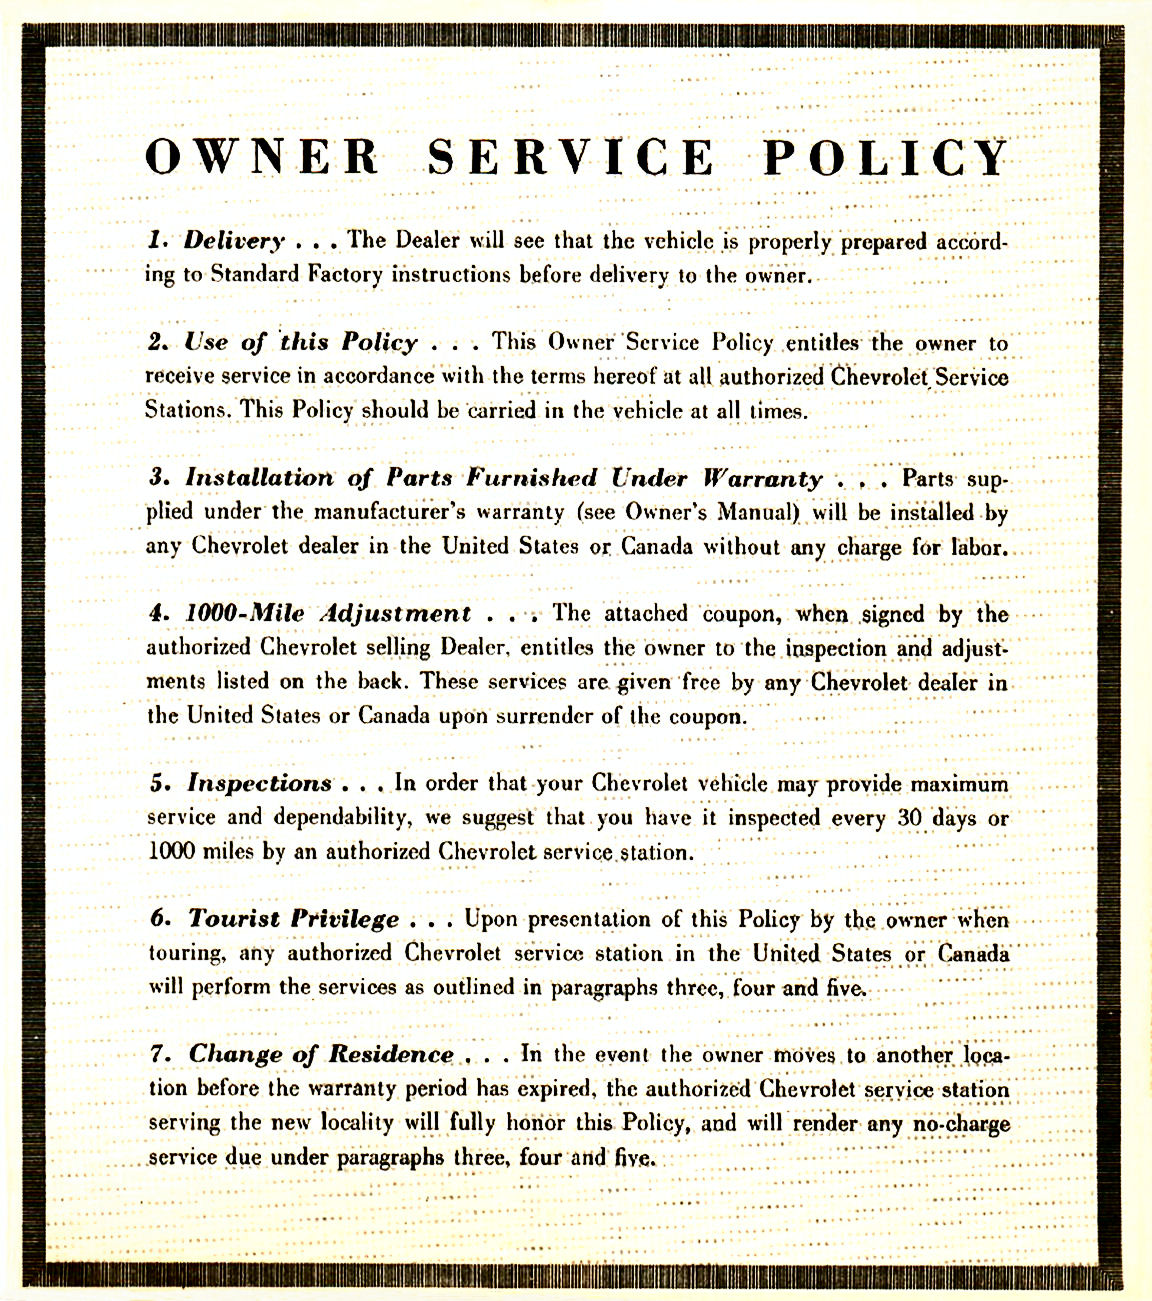 1955_Chevrolet_Service_Policy-05-06